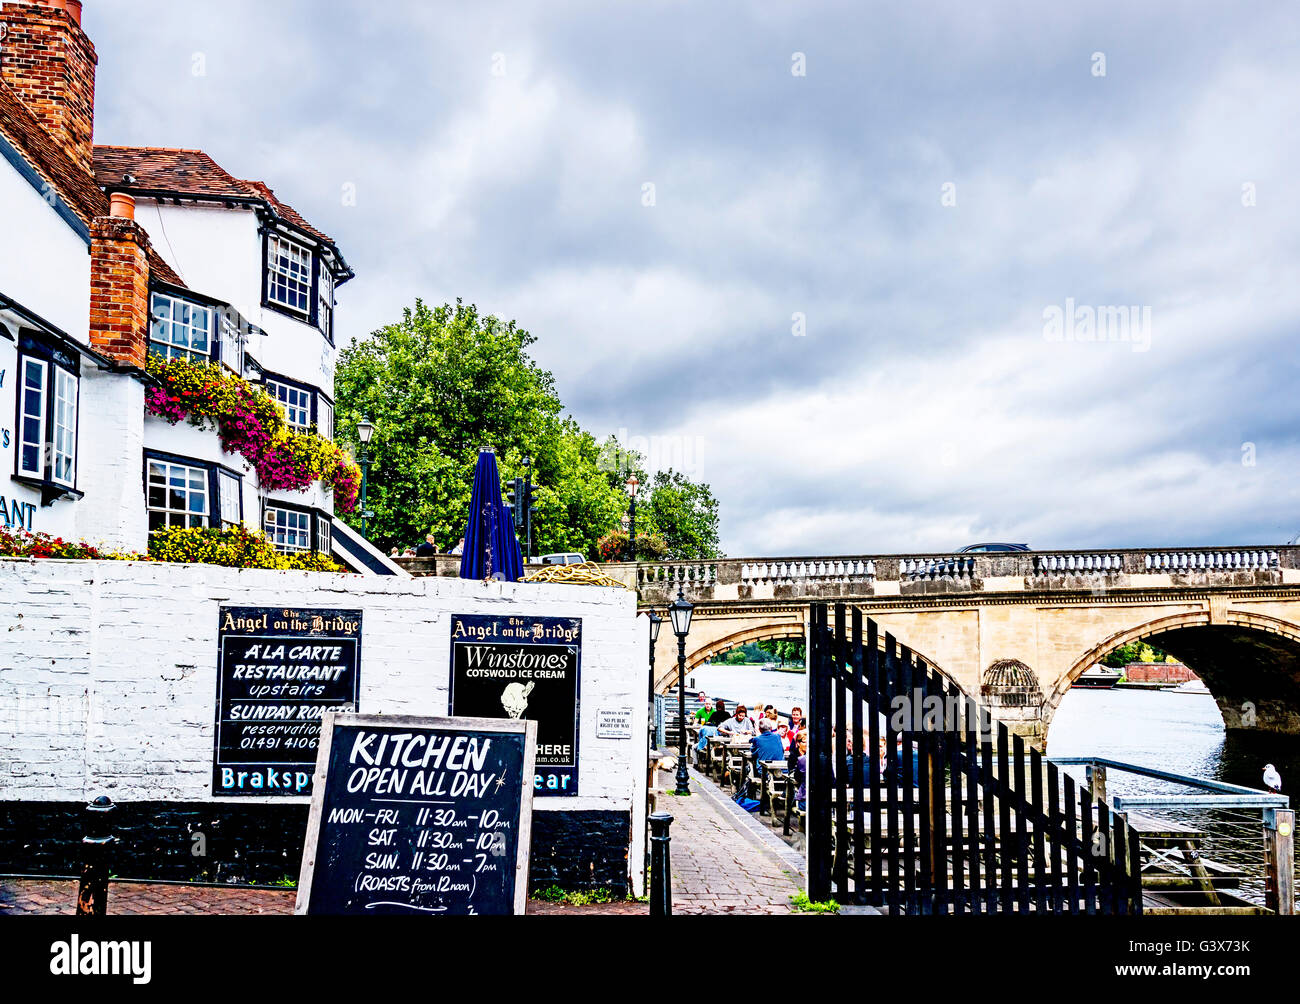 The Angel, a Pub in Henley, Thames; Gasthaus in henley an der Themse Stock Photo